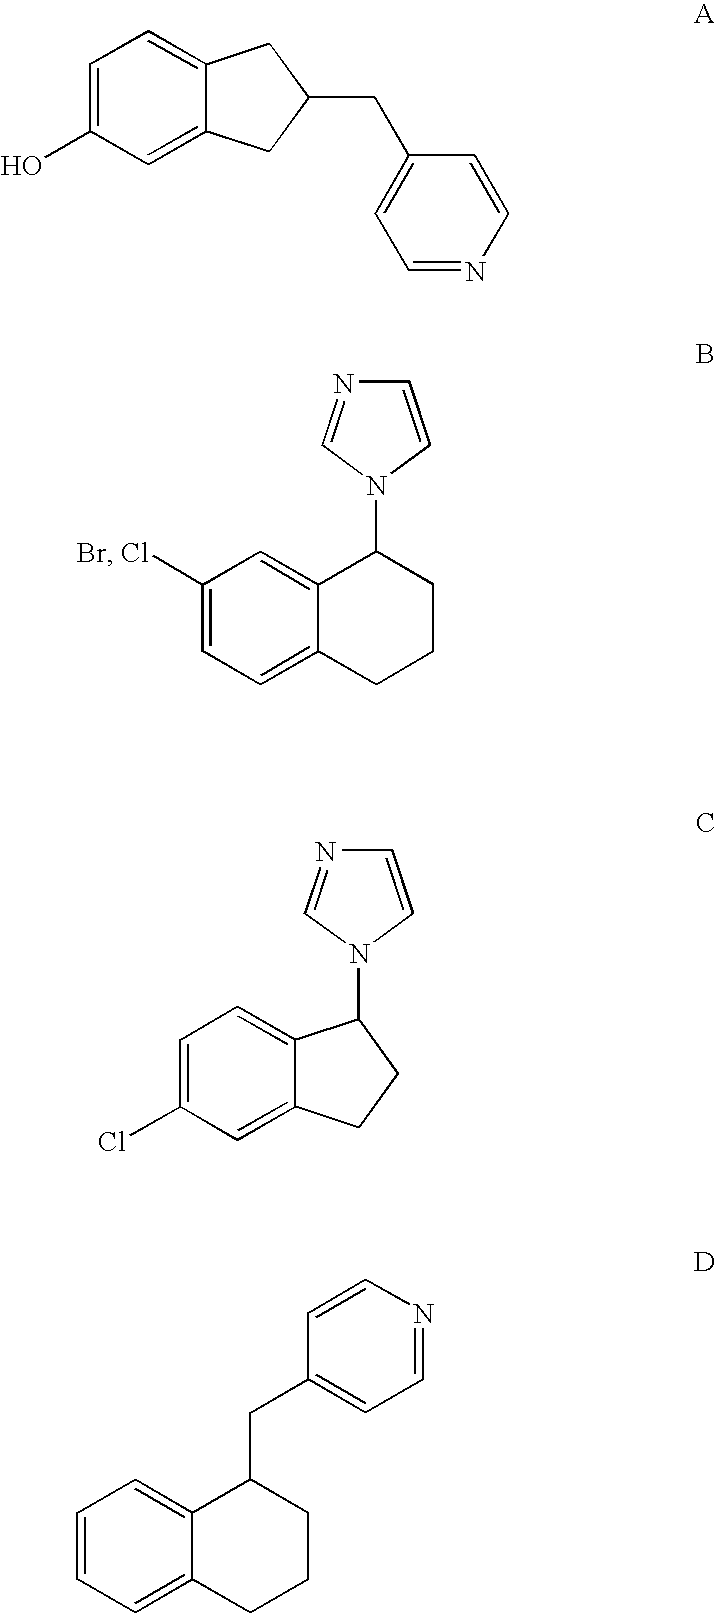 Selective inhibitors of human corticosteroid syntheses